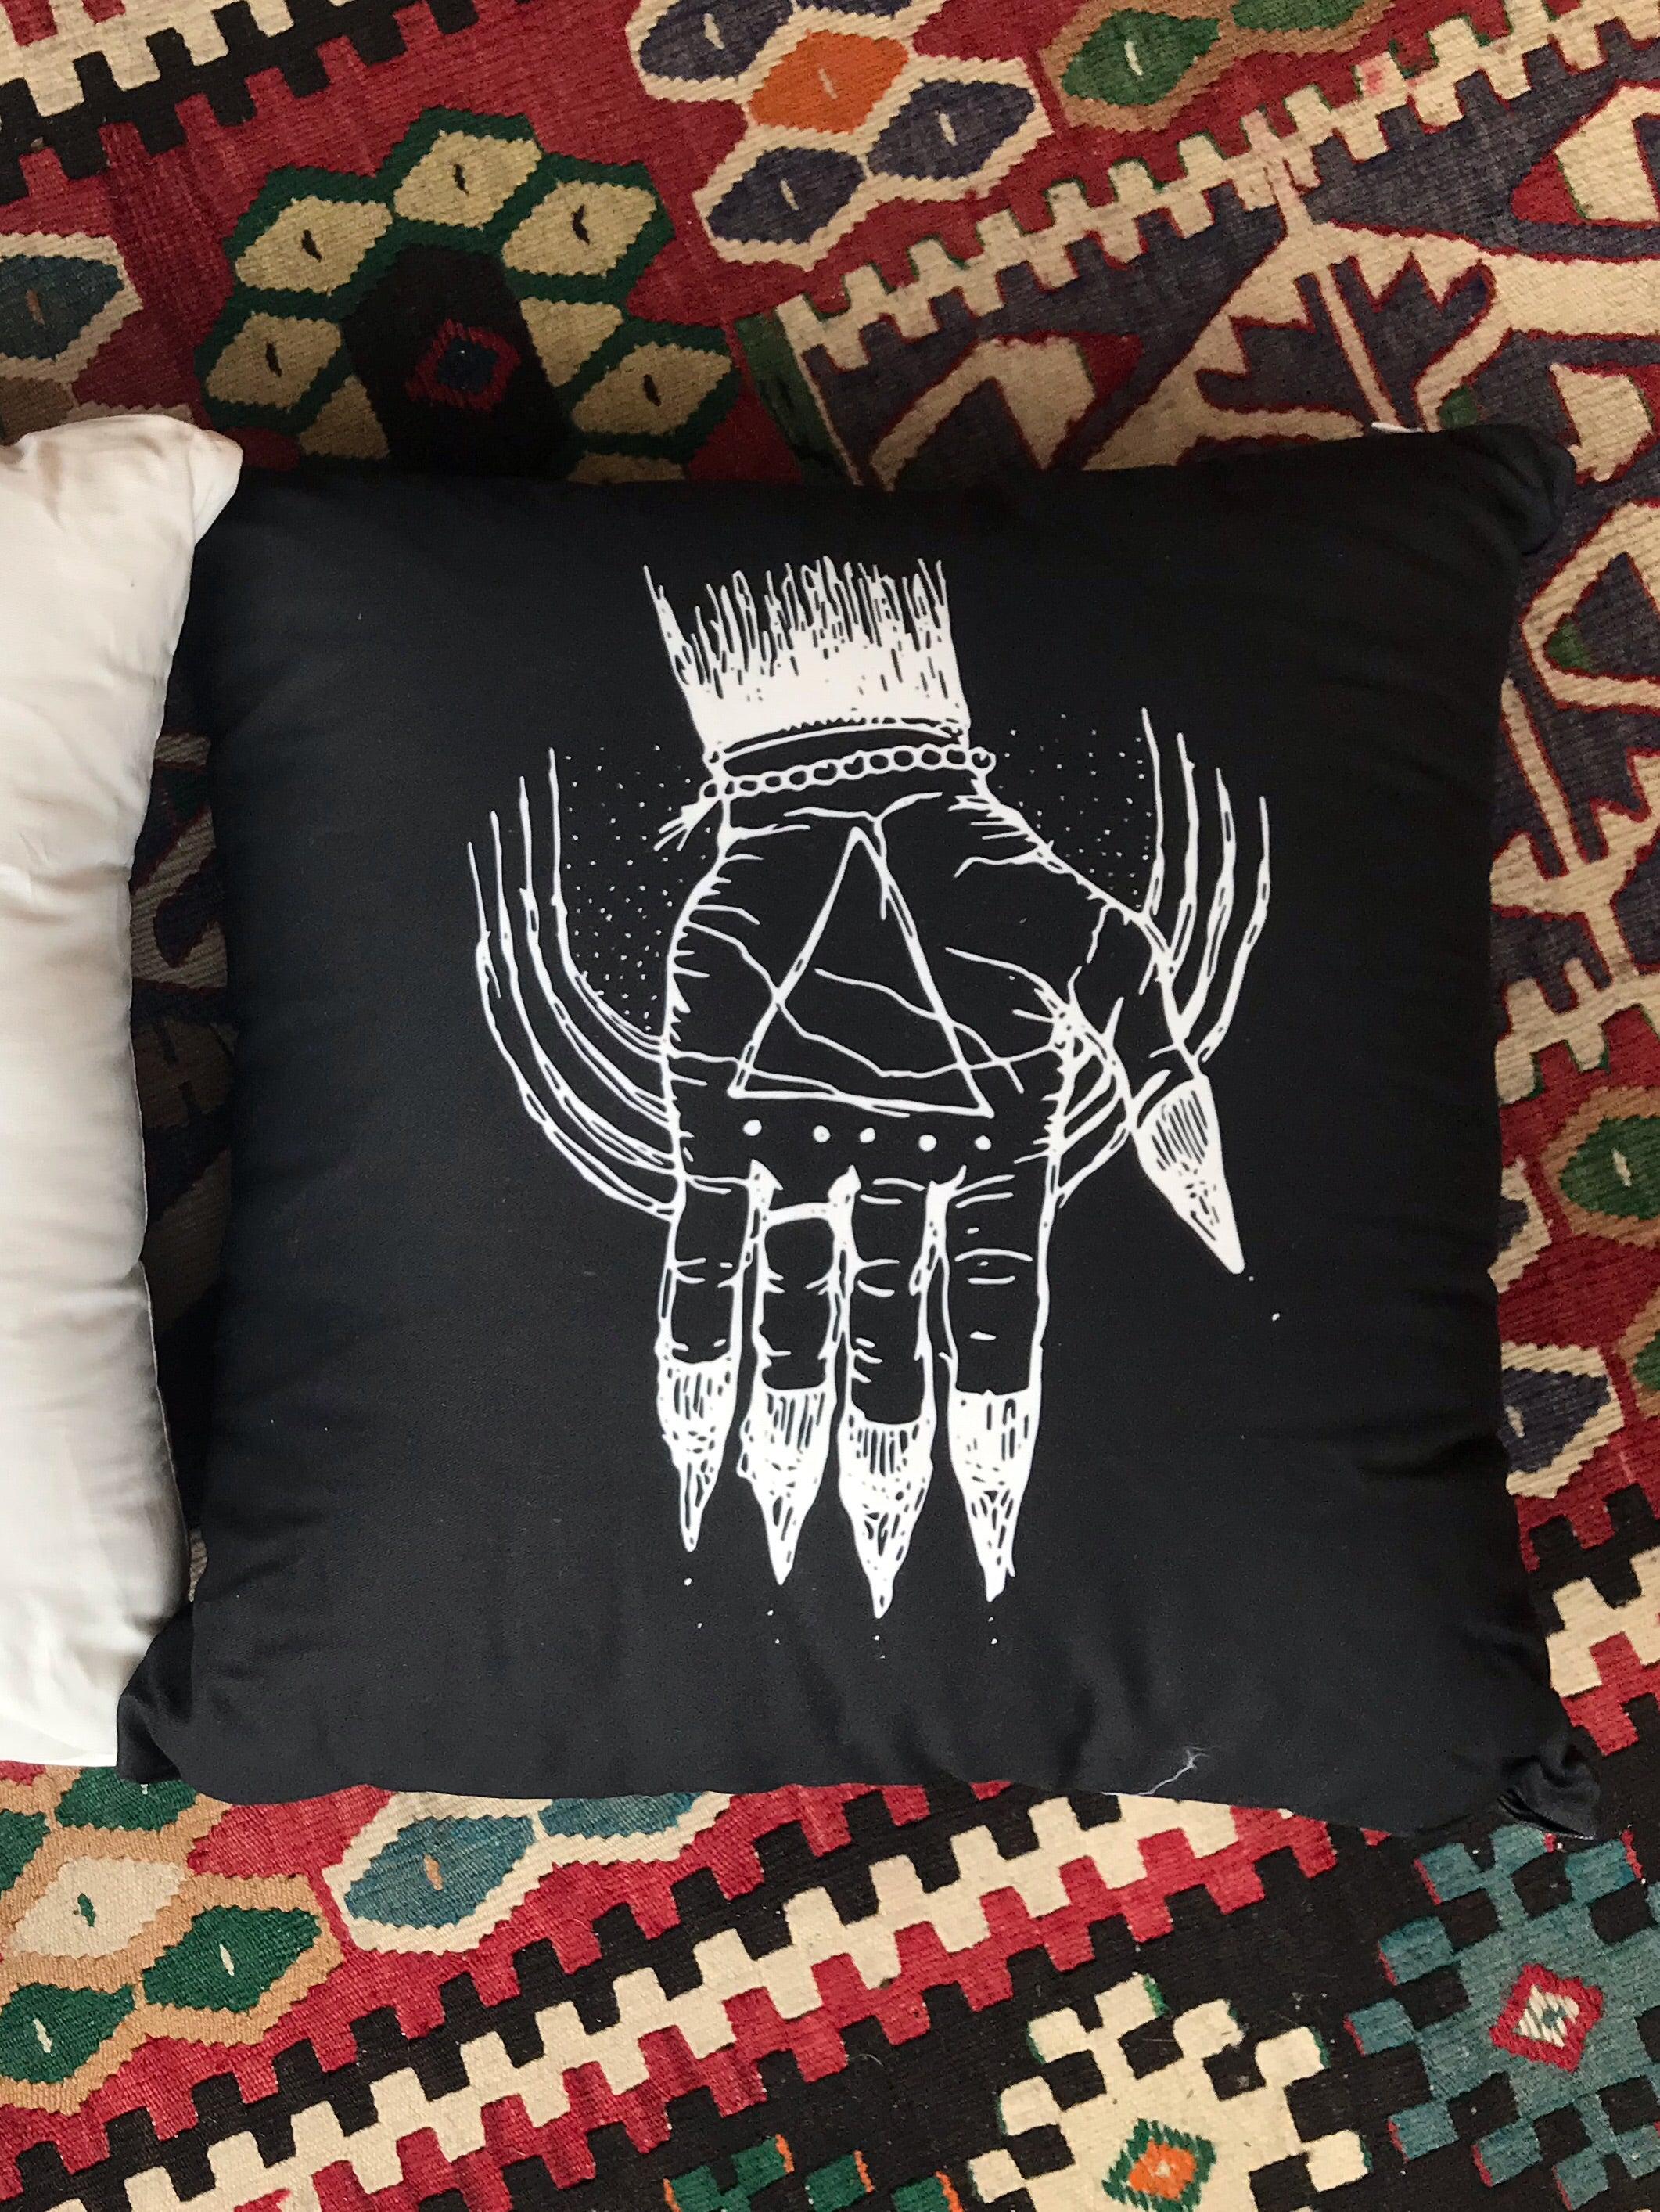 Hand of the Occult - Throw Pillow (Cotton) 16” x 16” - Keven Craft Rituals